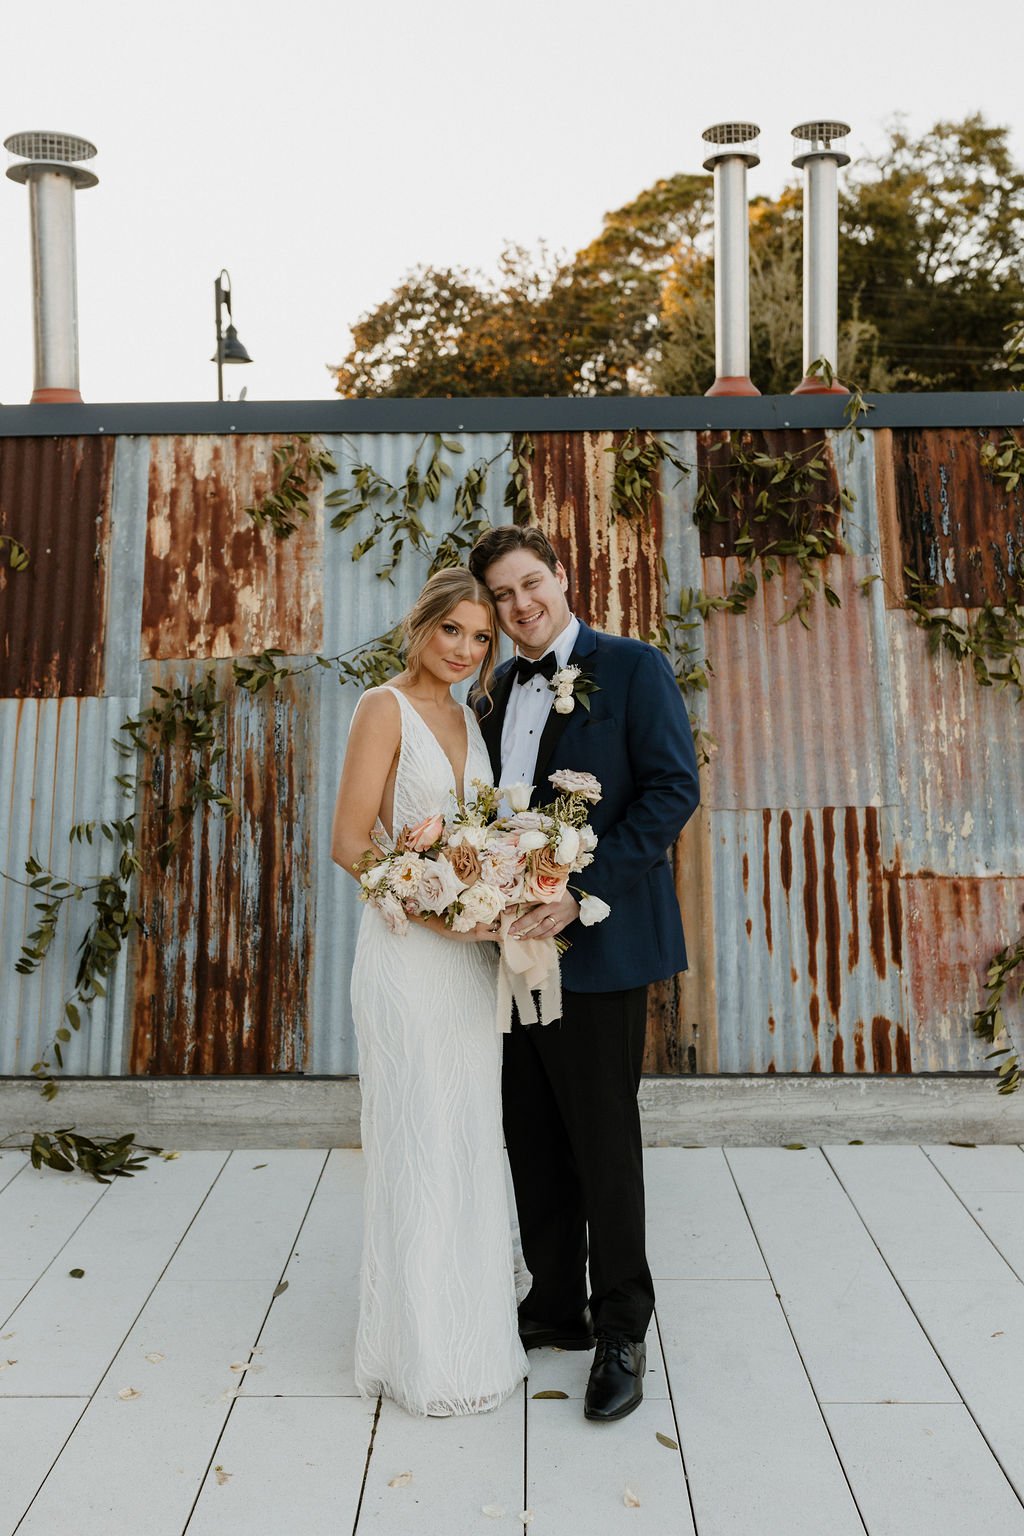 olivia-and-ryans-modern-industrial-chic-savannah-wedding-at-kehoe-iron-works-planned-by-savannah-wedding-planner-and-florist-ivory-and-beau-45.jpg